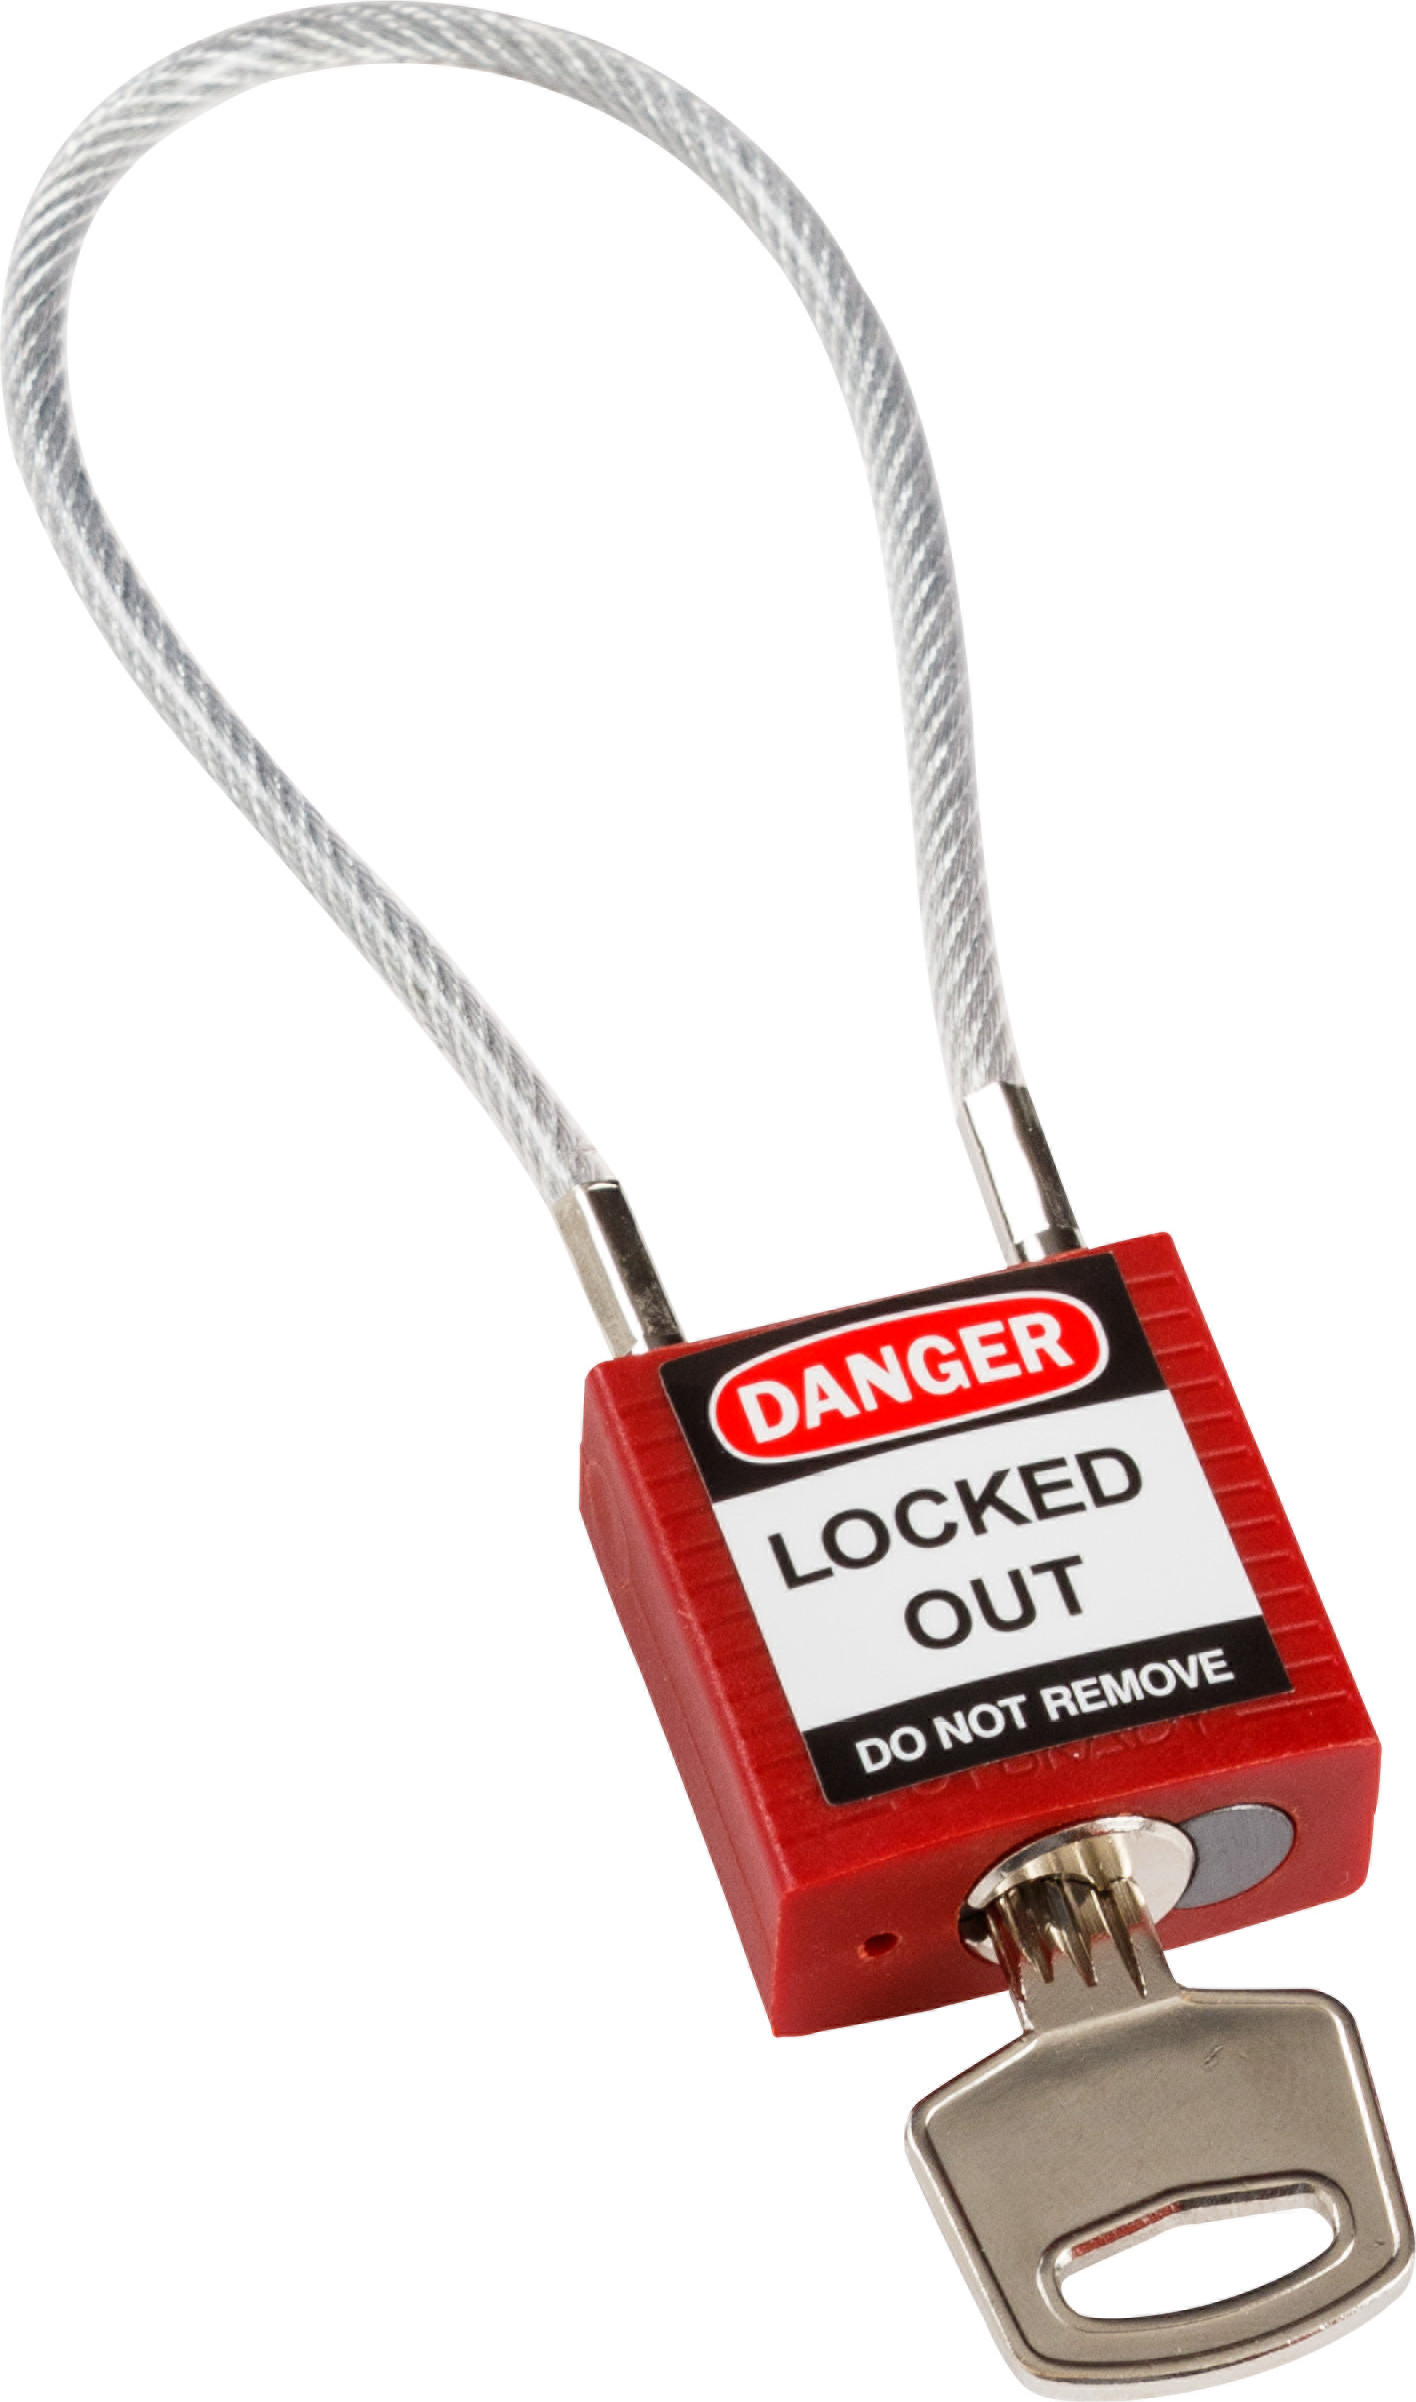 7458_compact_cable_safety_padlock_red_with_key